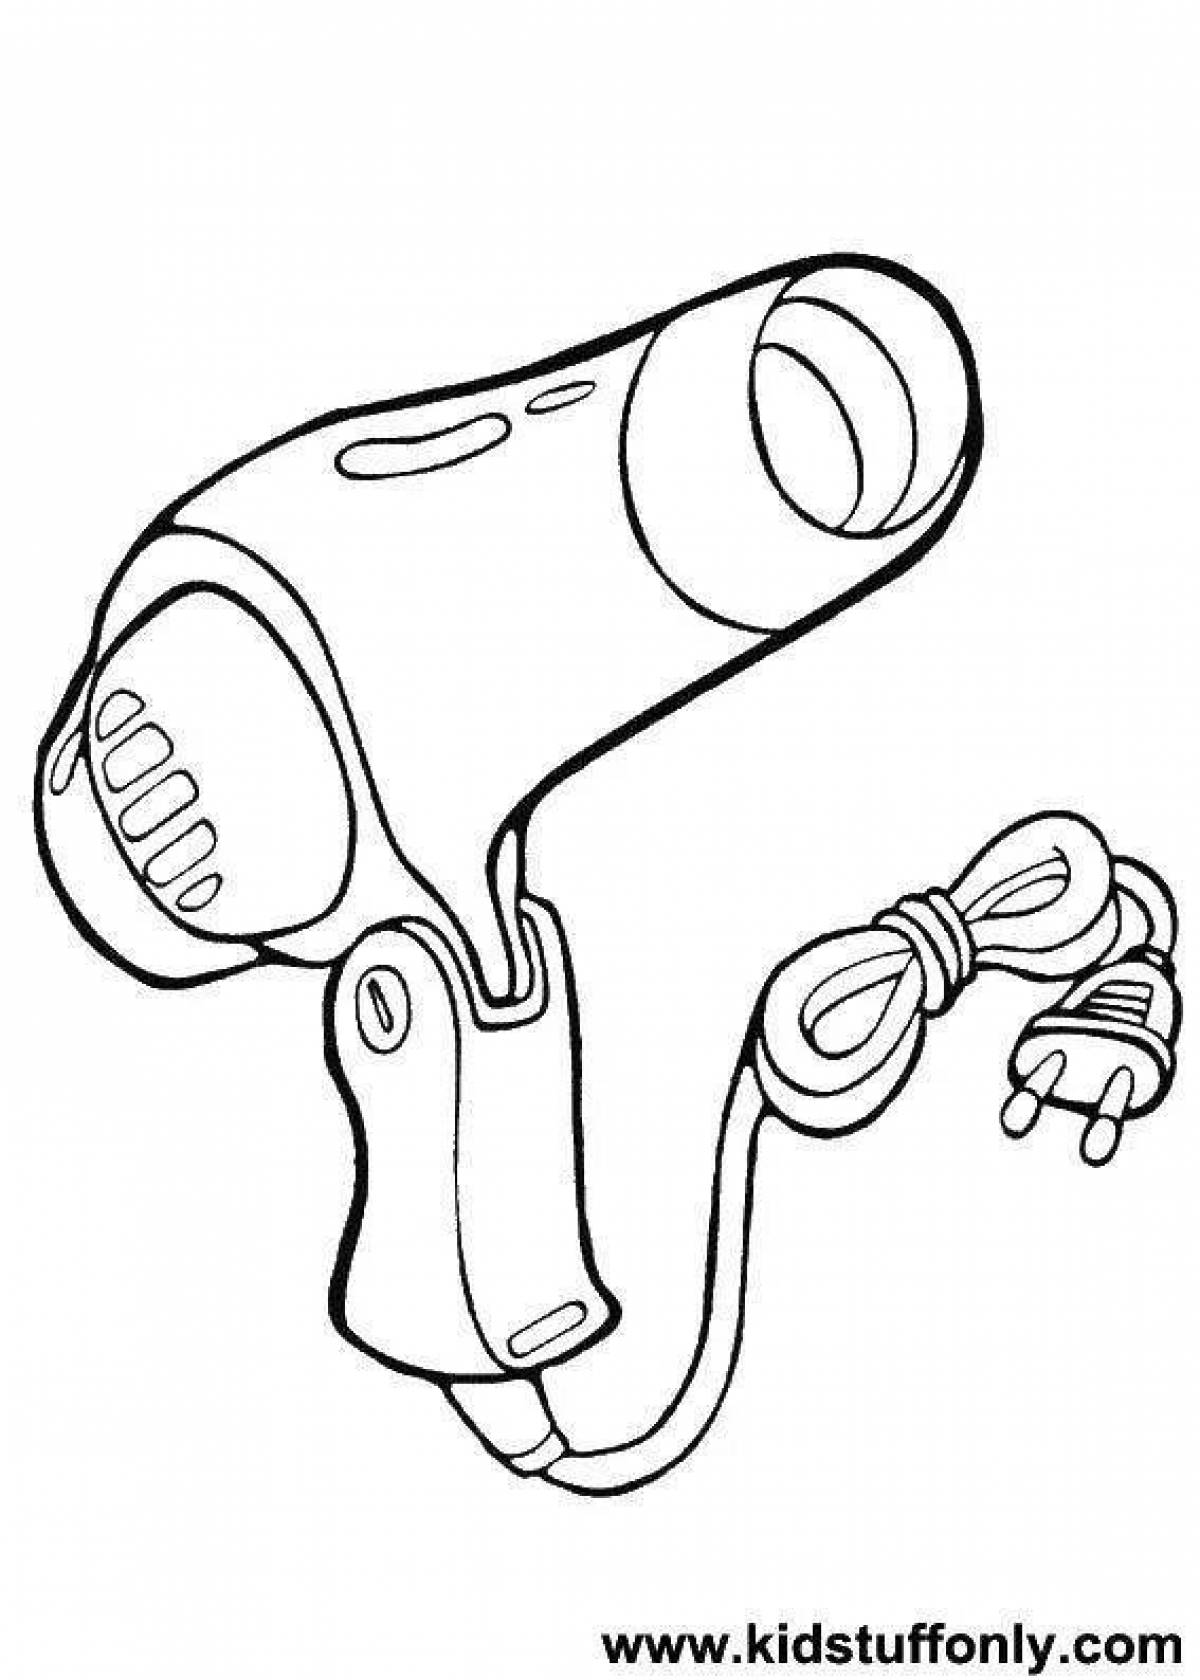 Adorable hair dryer coloring page